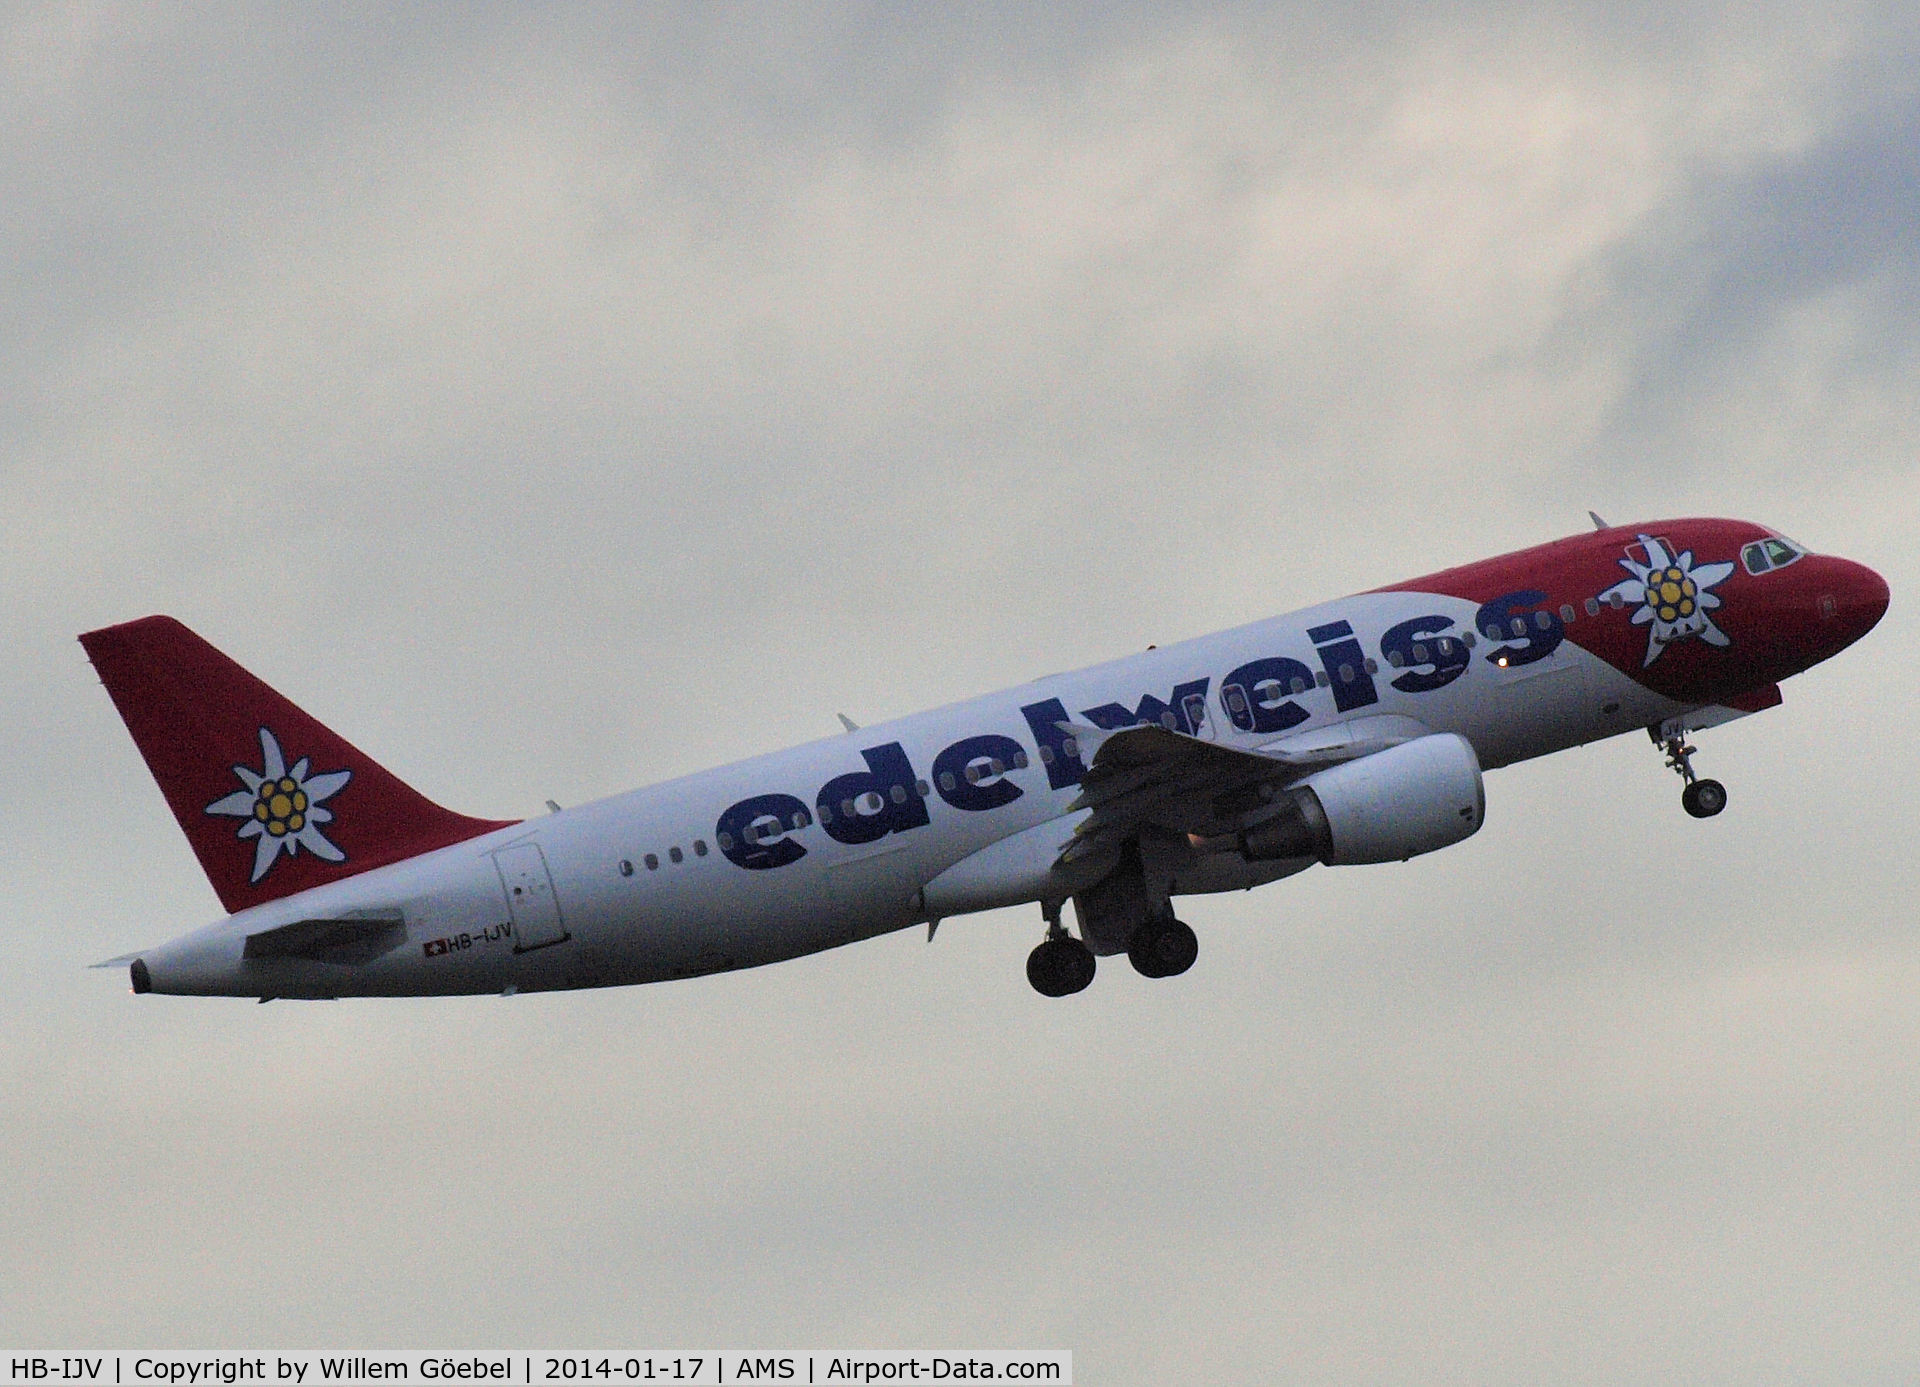 HB-IJV, 2003 Airbus A320-214 C/N 2024, Take off from runway L18 of Schiphol Airport